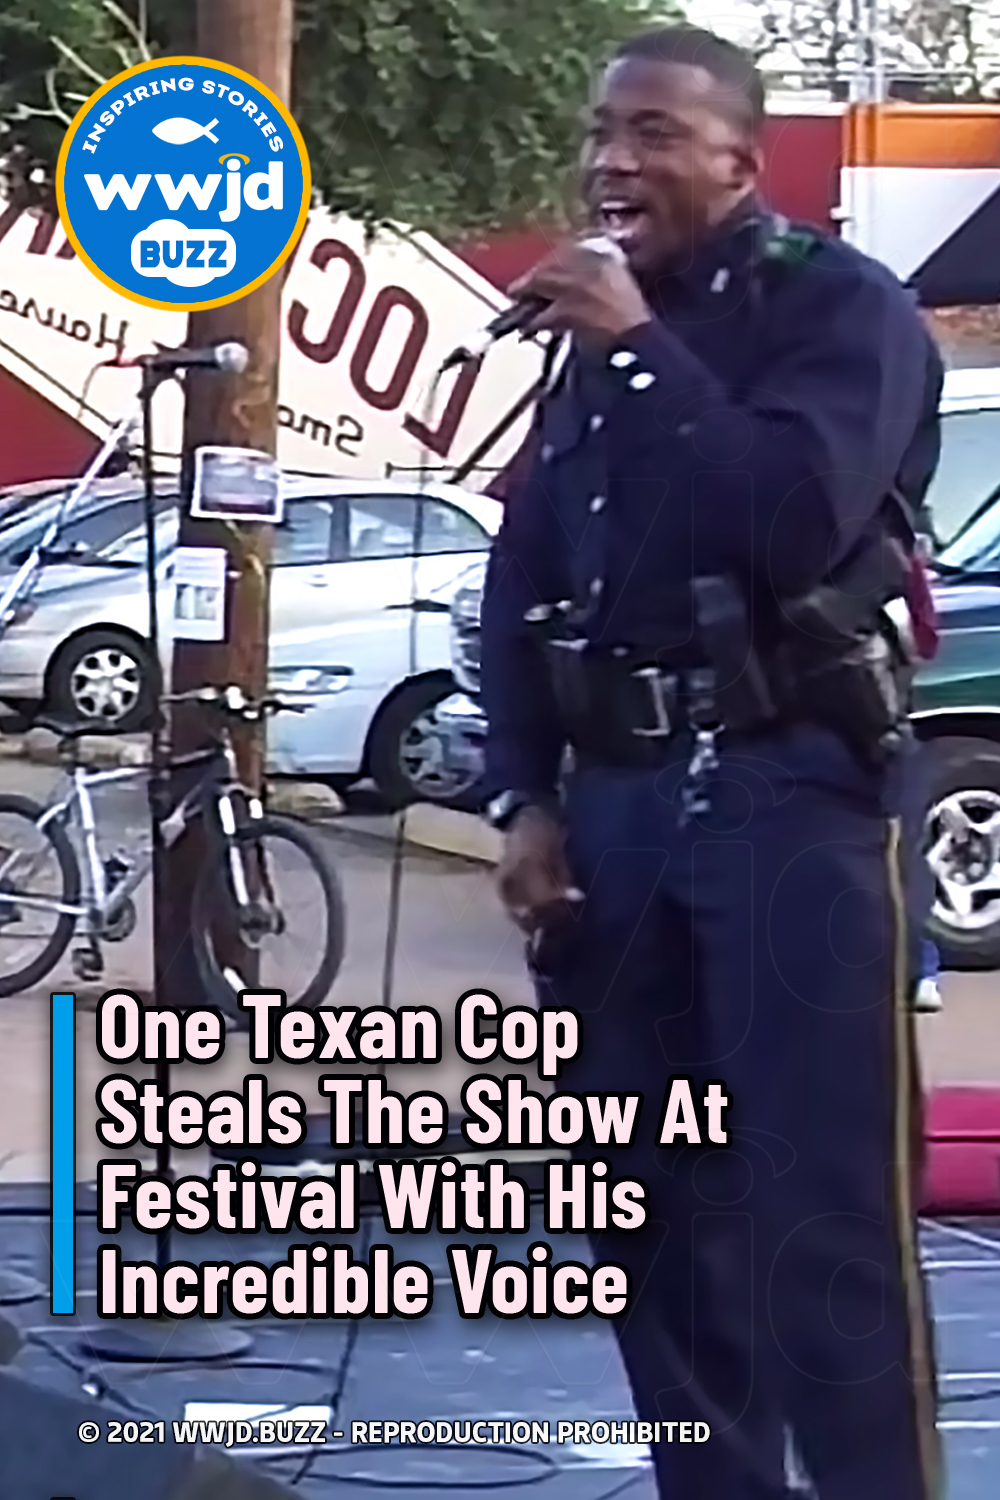 One Texan Cop Steals The Show At Festival With His Incredible Voice